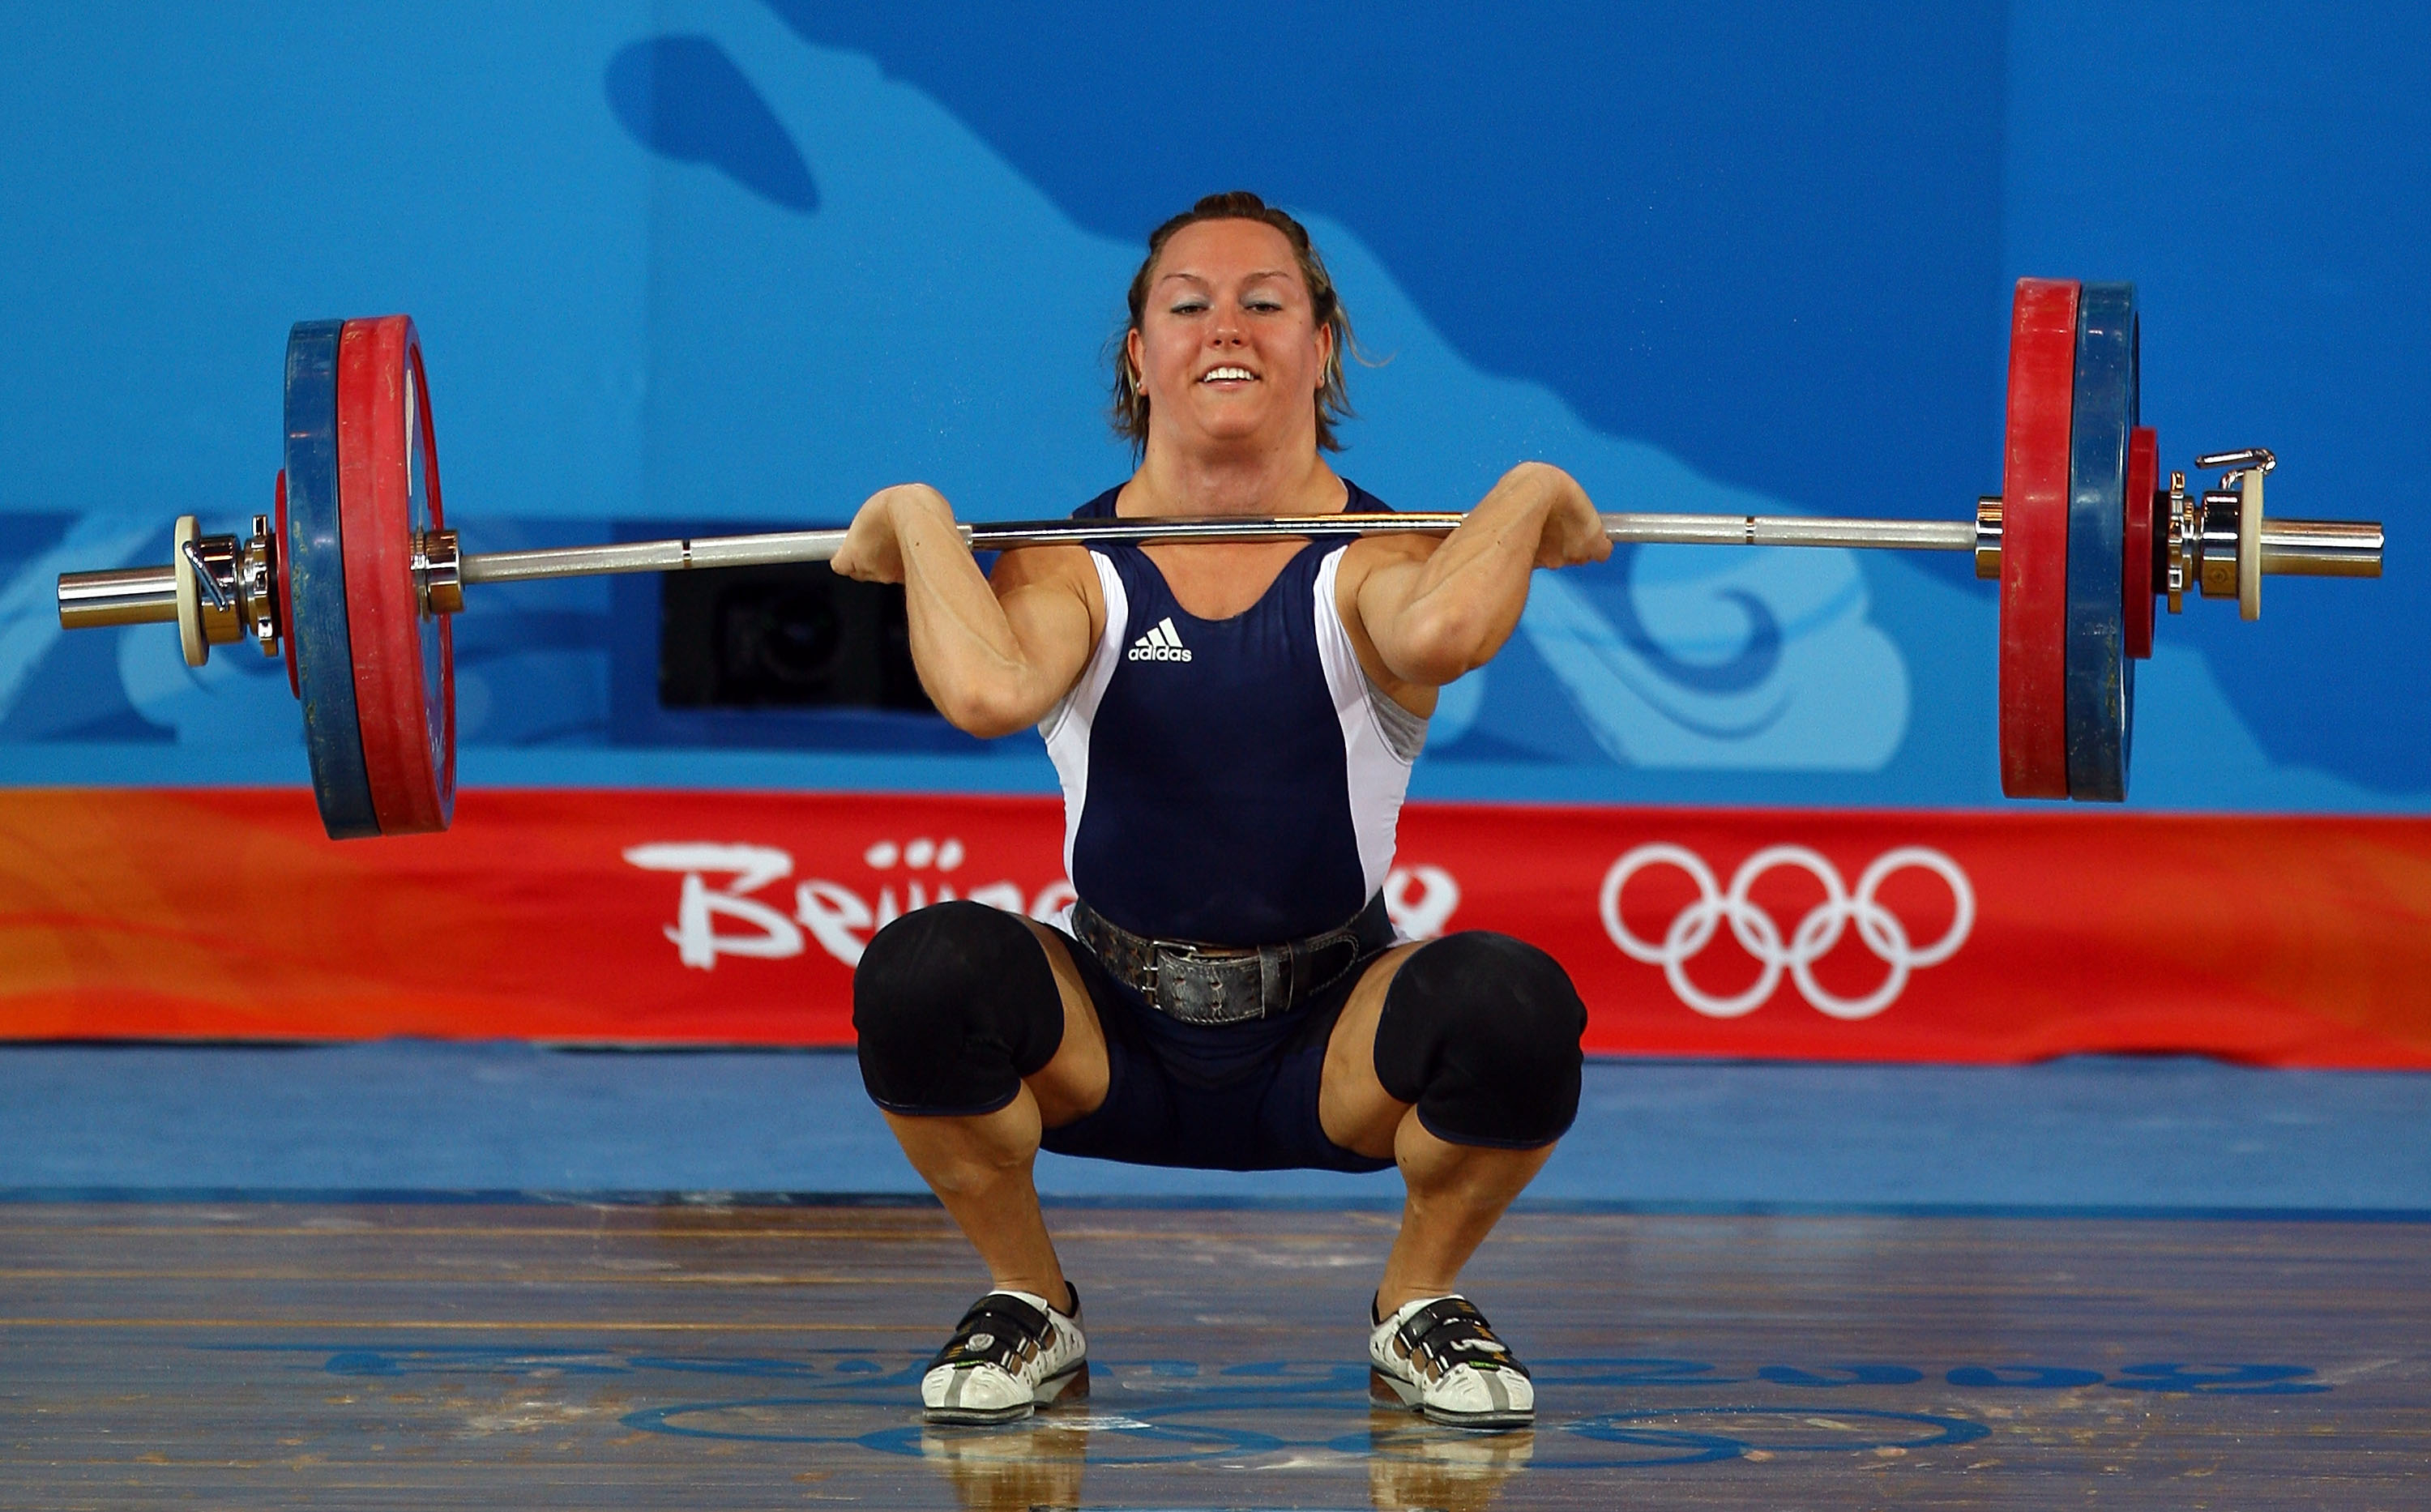 3000x1866 Free download Olympic Weight Lifting Wallpaper Weight lifting viewing [] for your Desktop, Mobile \u0026 Tablet | Explore 48+ Olympic Weightlifting Wallpaper | Olympic Weightlifting Wallpaper, Olympic Flag Wallpapers, Olympic National Park Wallpapers